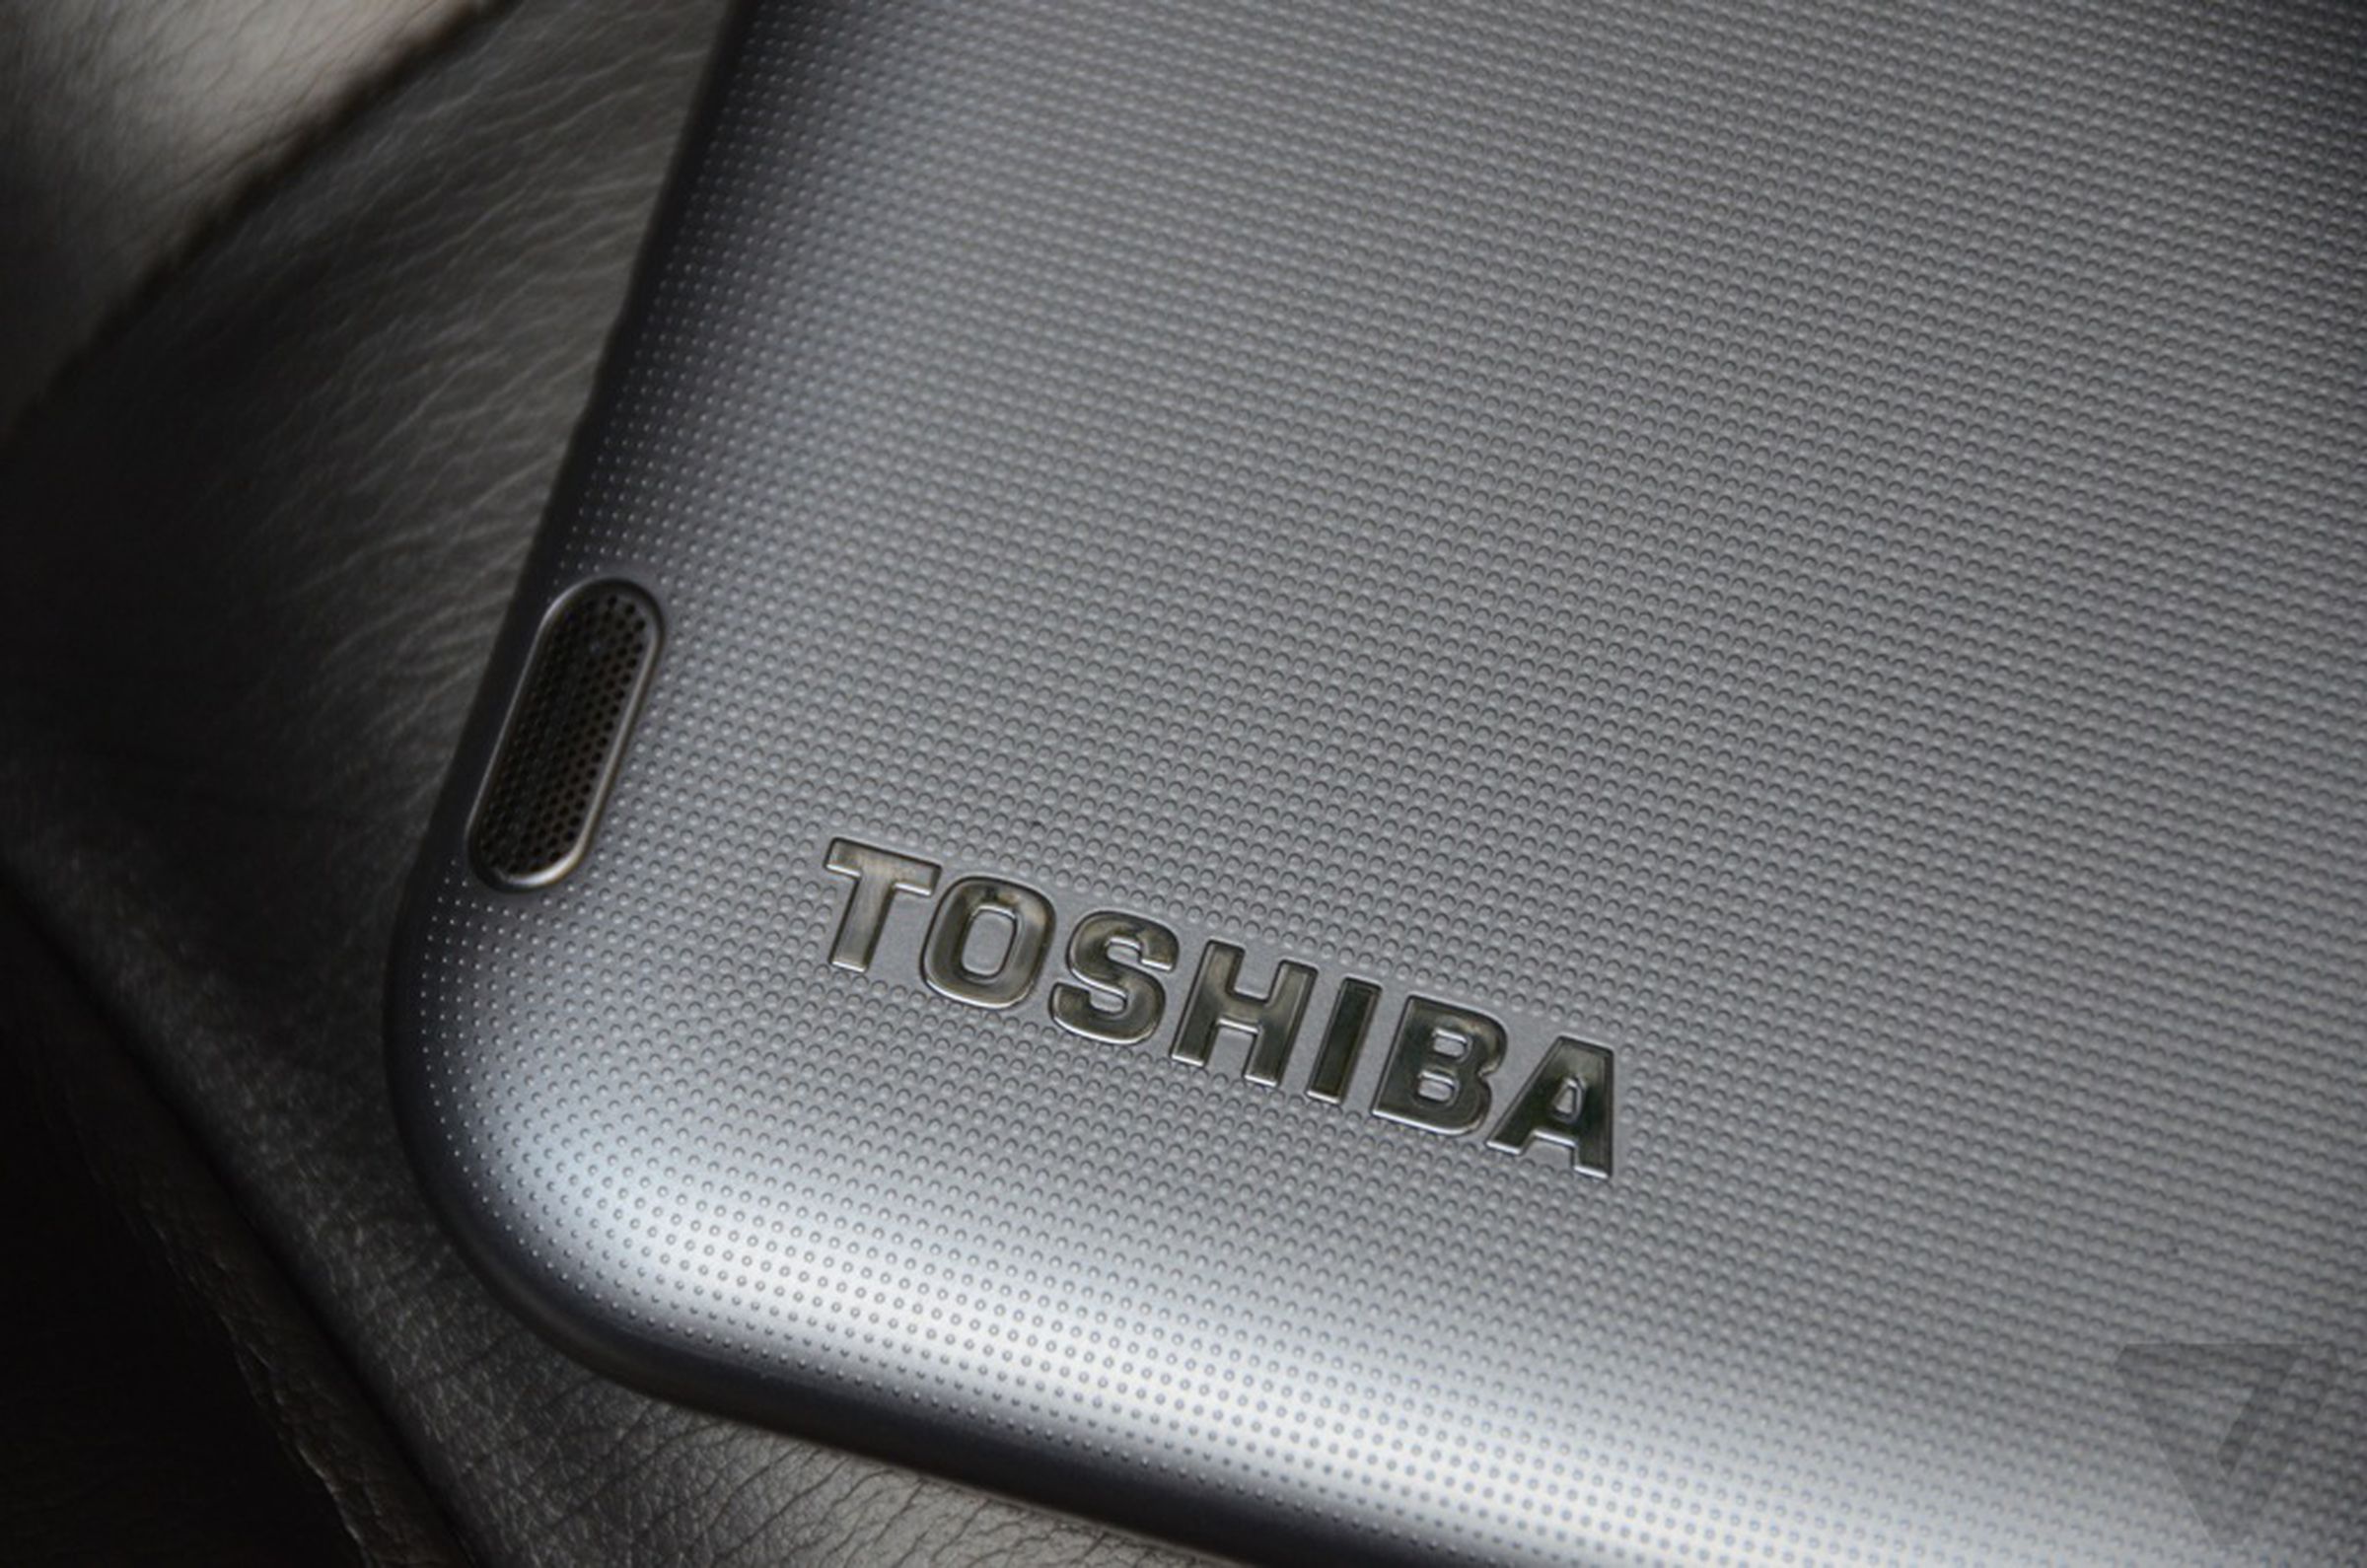 Toshiba Excite Pure, Pro, and Write pictures